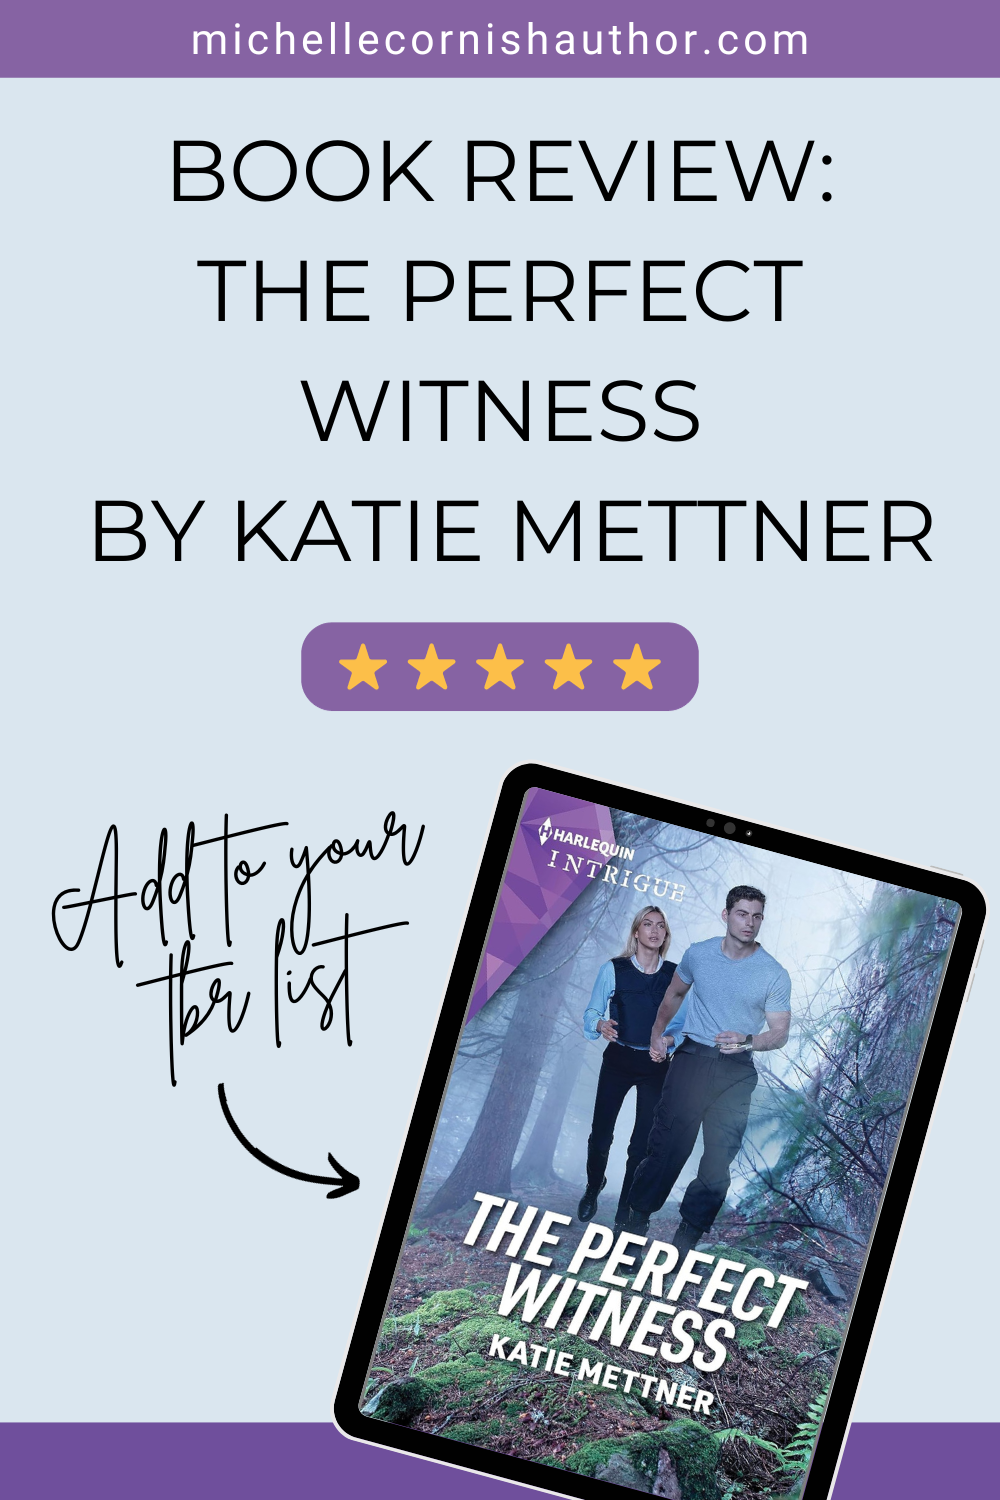 Thrilling Justice and Survival by Katie Mettner